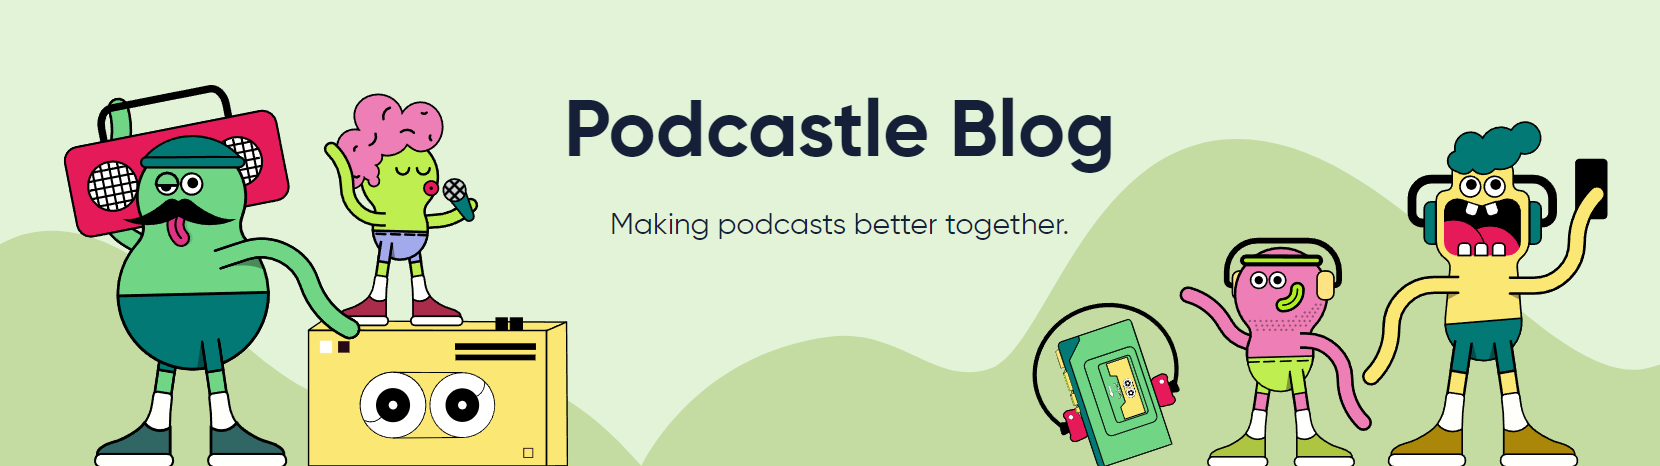 Podcastle podcast blog homepage